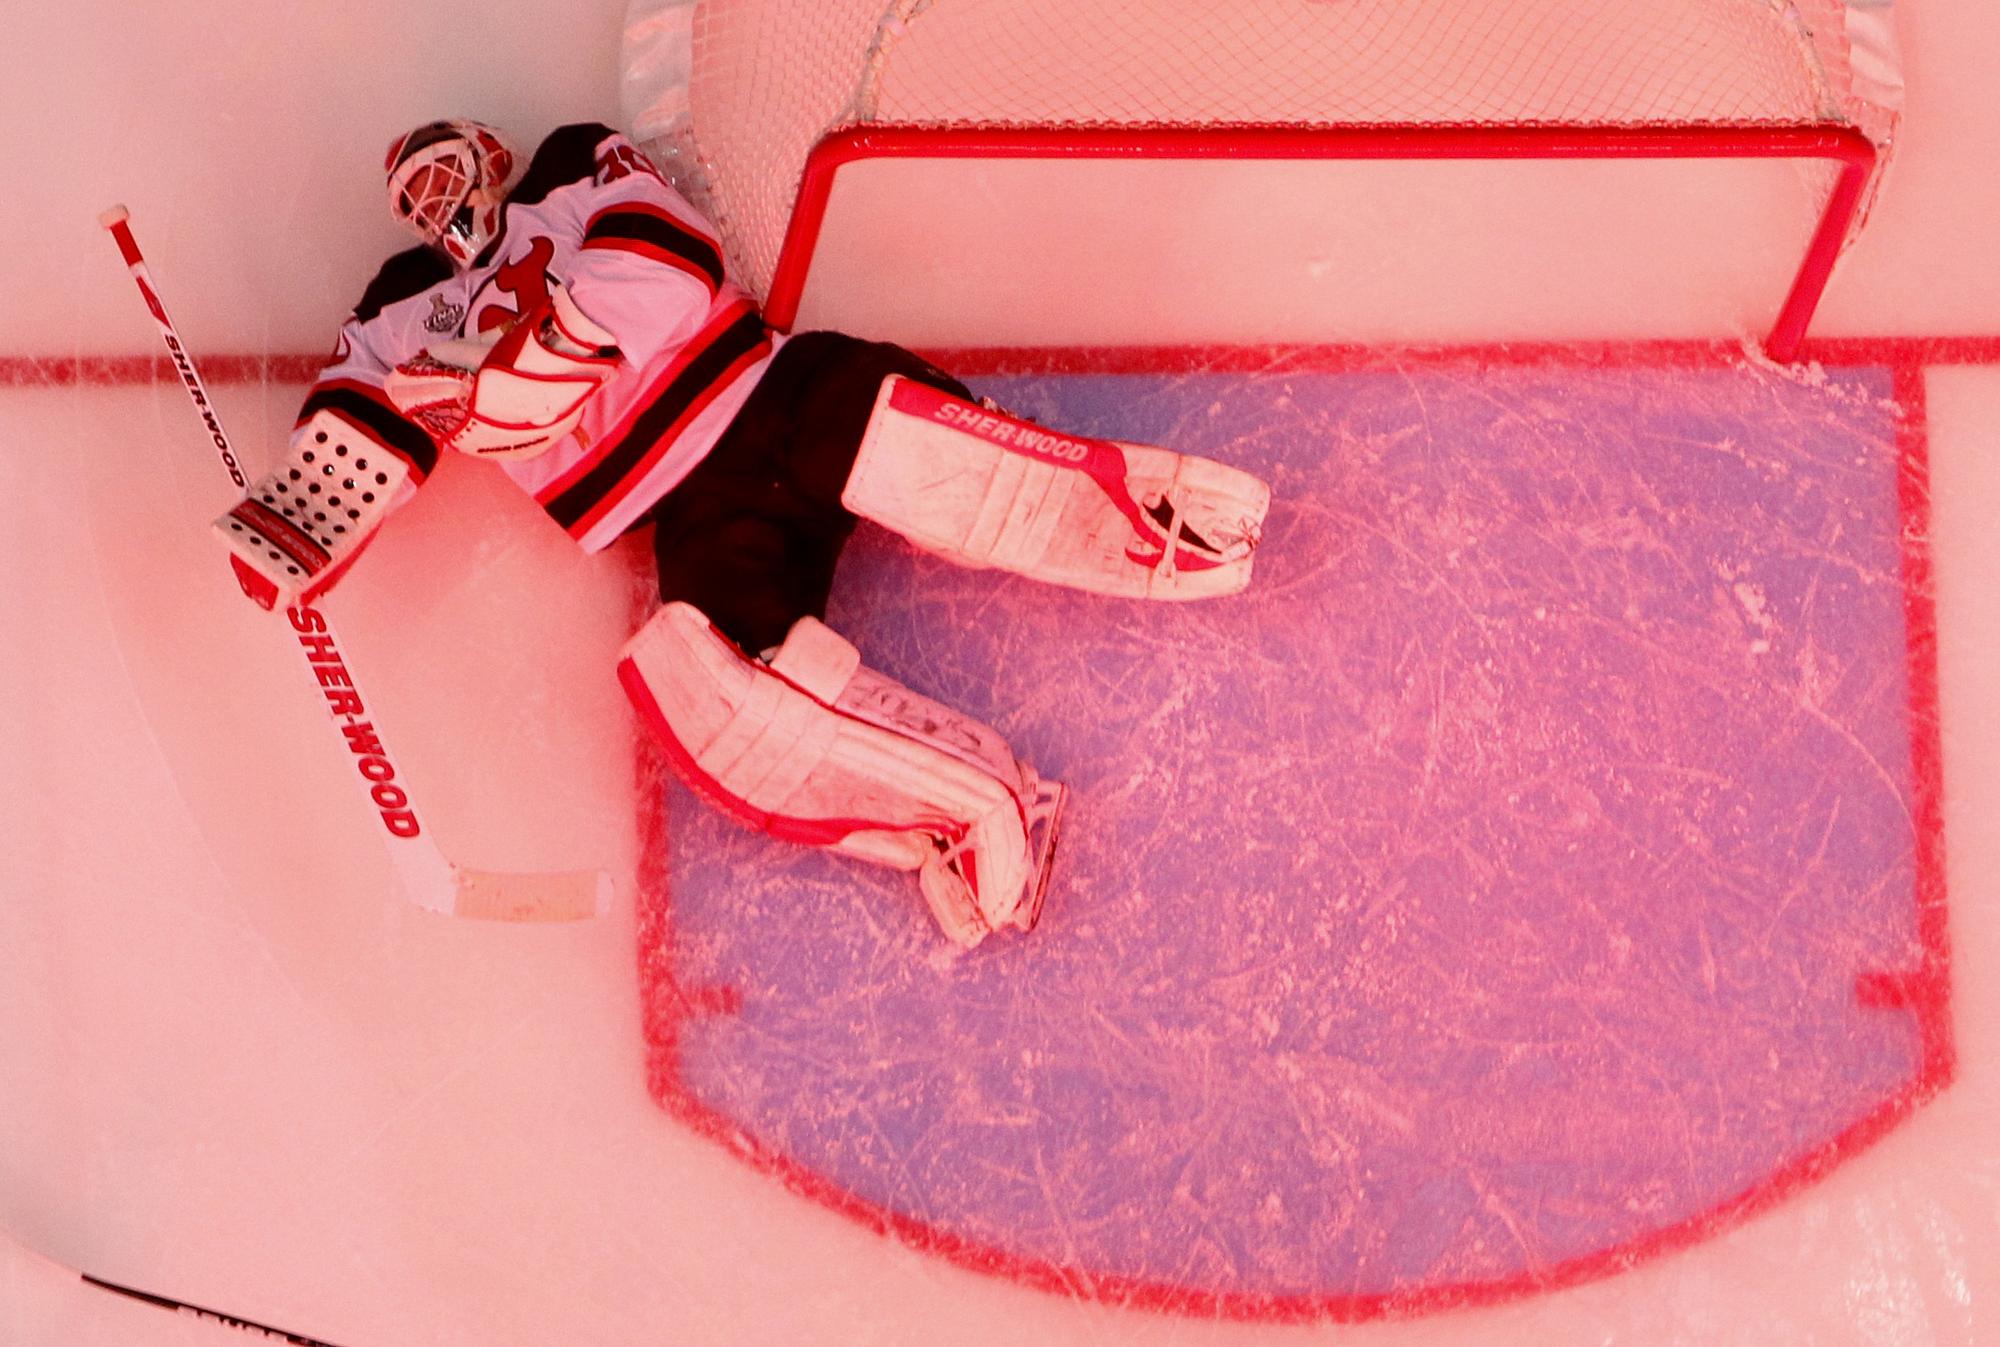 New Jersey Devils Martin Brodeur lays on the ice after Los Angeles Kings Jeff Carter scored during the third period in Game 3 of the NHL Stanley Cup hockey finals in Los Angeles, June 4, 2012. This picture is tinted red due to the spotlights turned on after a Kings goal. REUTERS/Danny Moloshok (UNITED STATES - Tags: SPORT ICE HOCKEY) [Danny Moloshok]